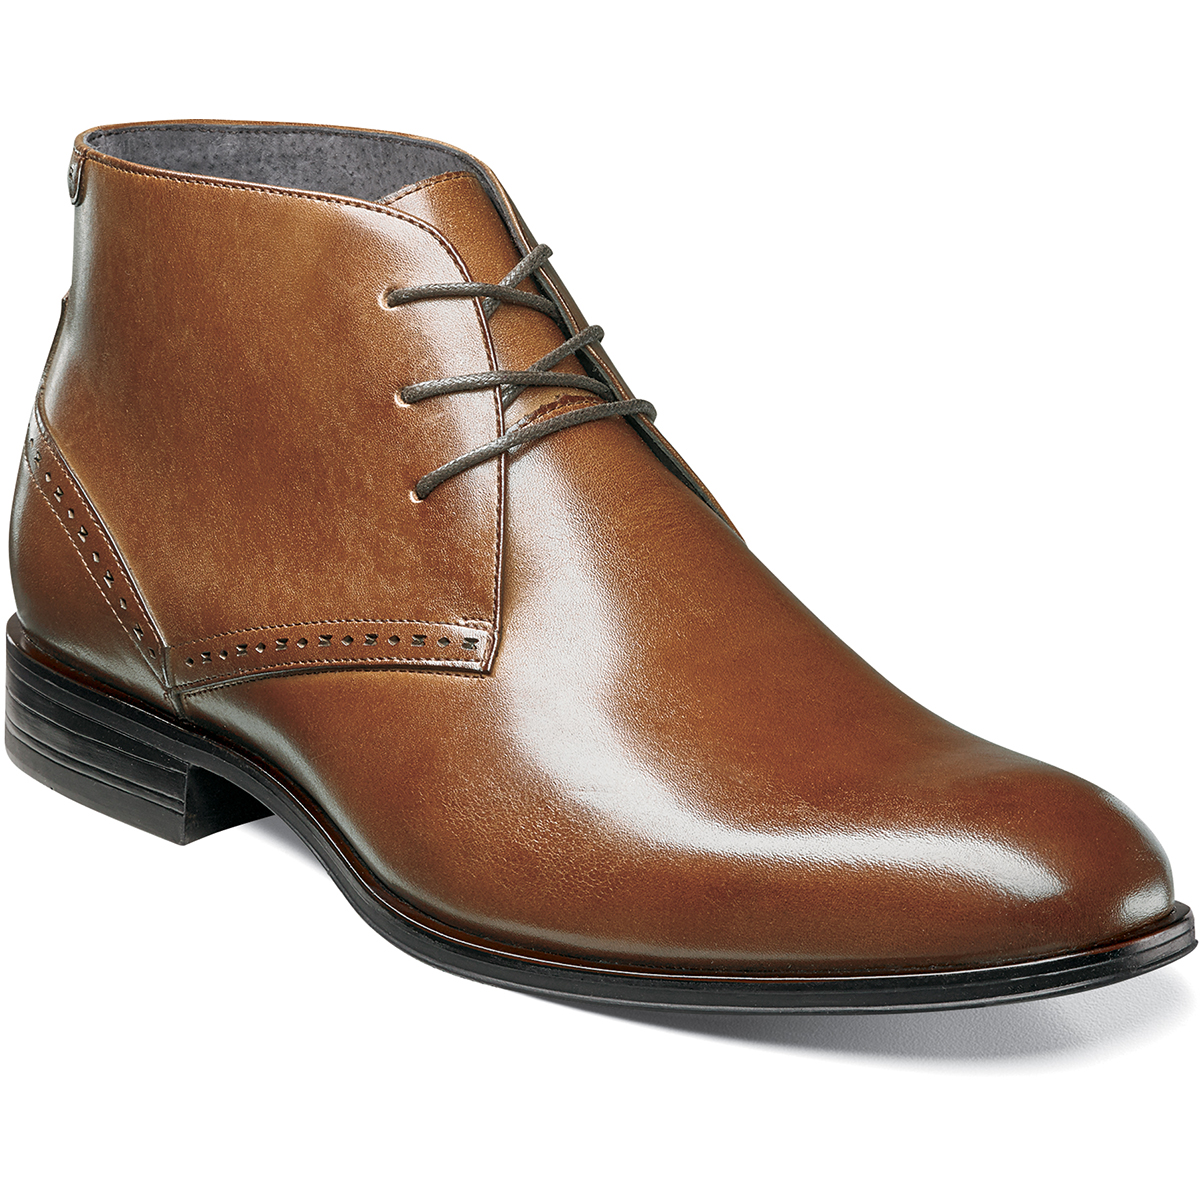 Clearance Shoes | Cognac Plain Toe Boot | Stacy Adams Strickland